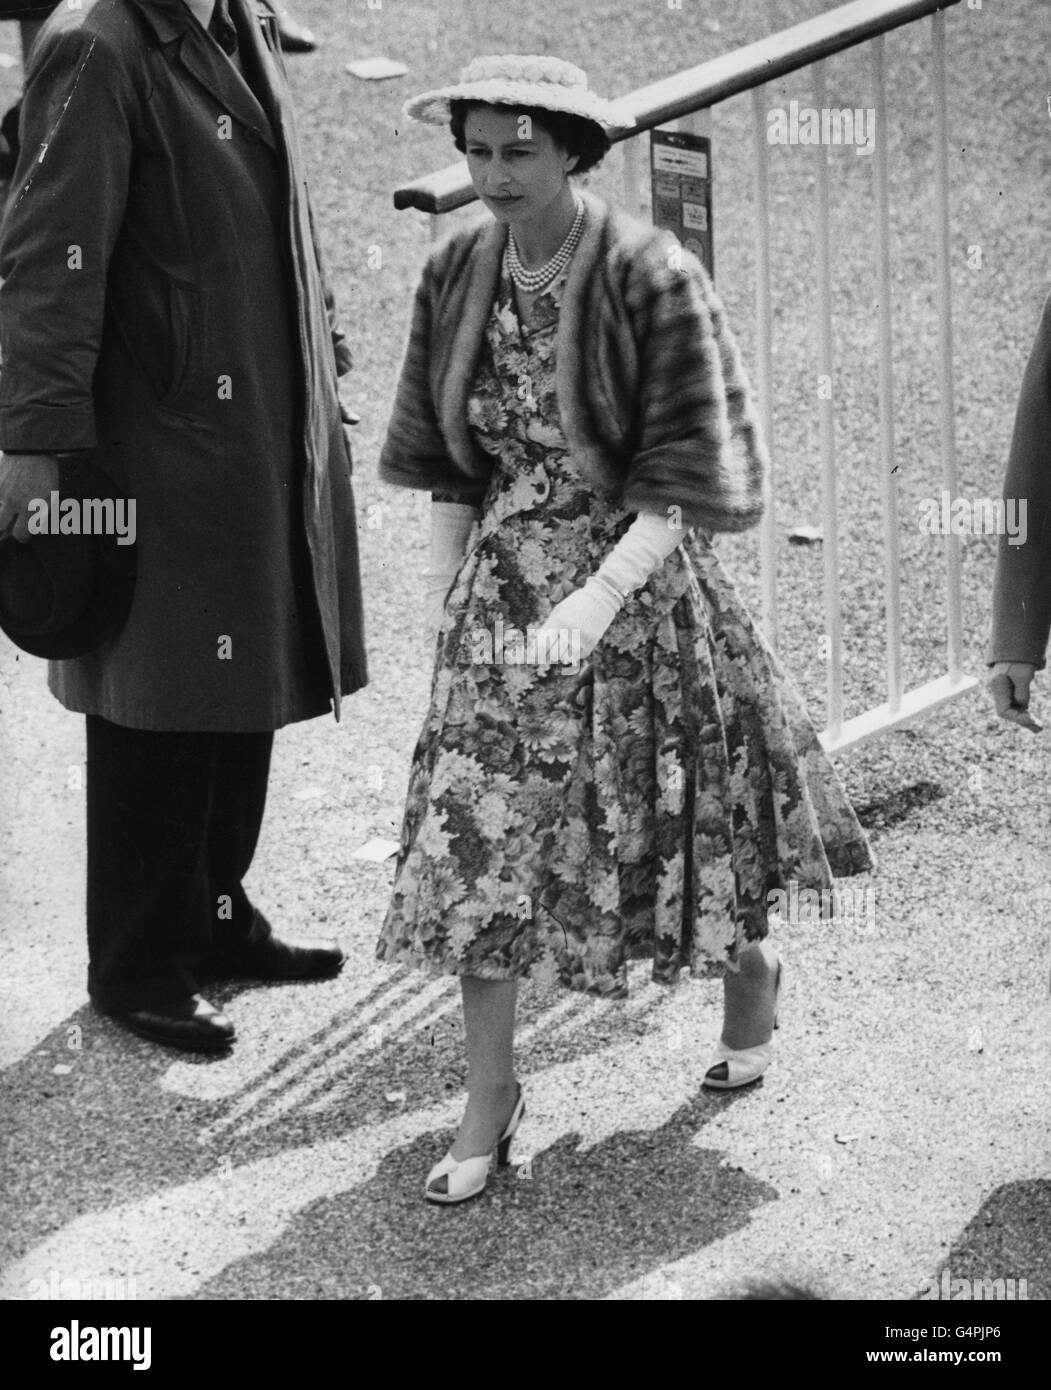 Horse Racing - Royal Ascot - Ascot Racecourse. Queen Elizabeth II on the opening day of the Royal Ascot meeting, on her way to the saddling boxes to see her horse High Veldt. Stock Photo